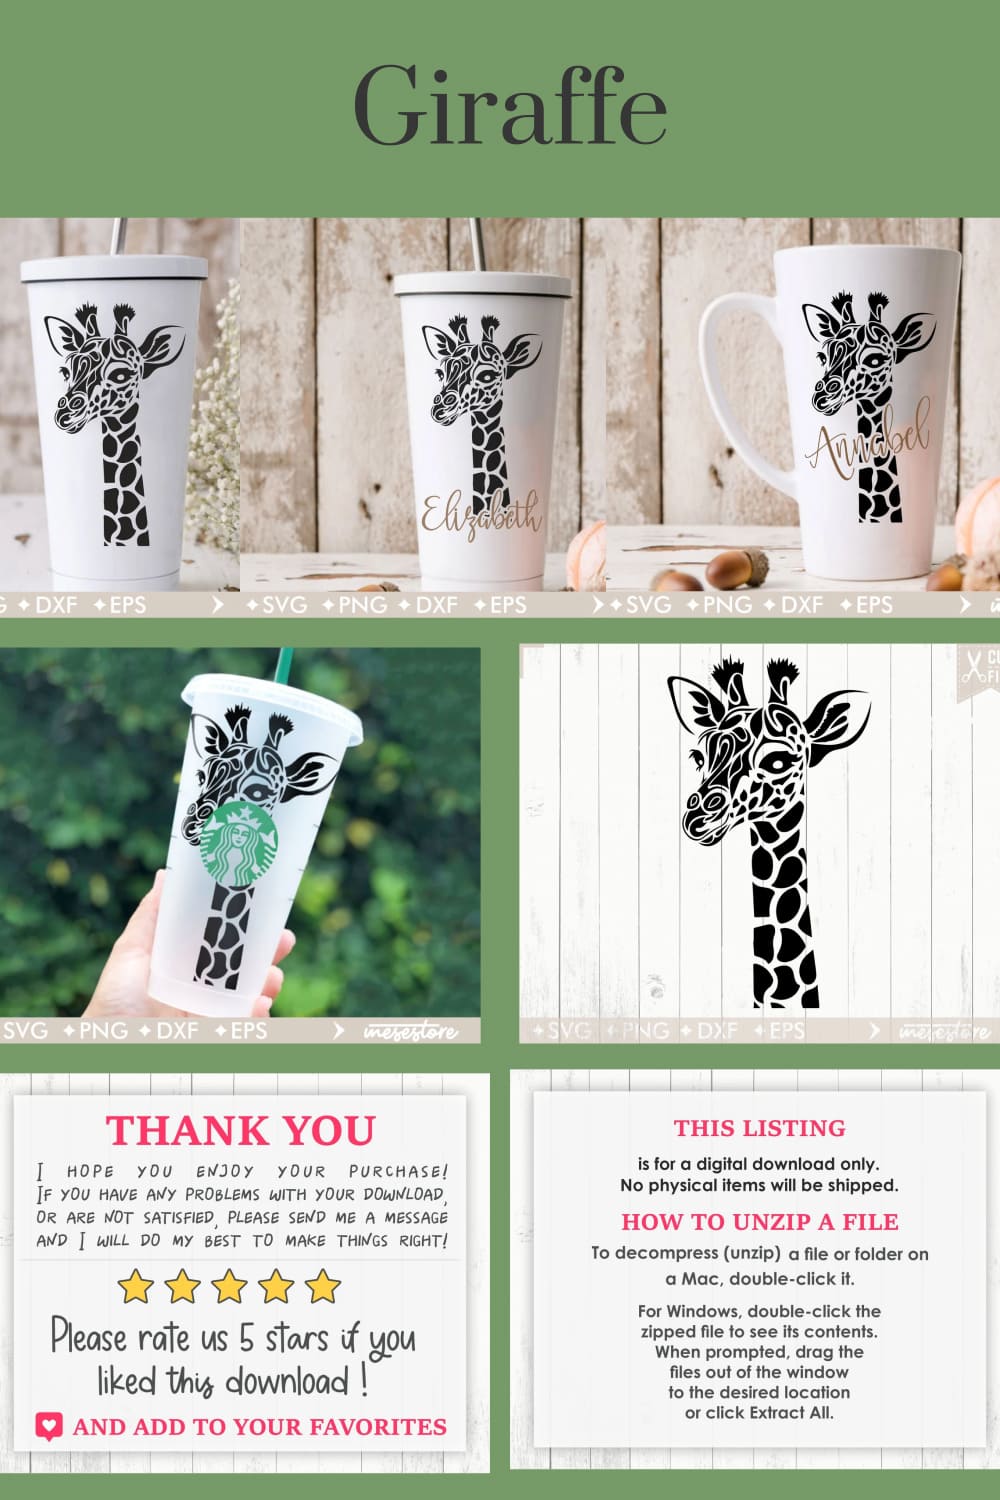 Coffee cup with a giraffe design on it.